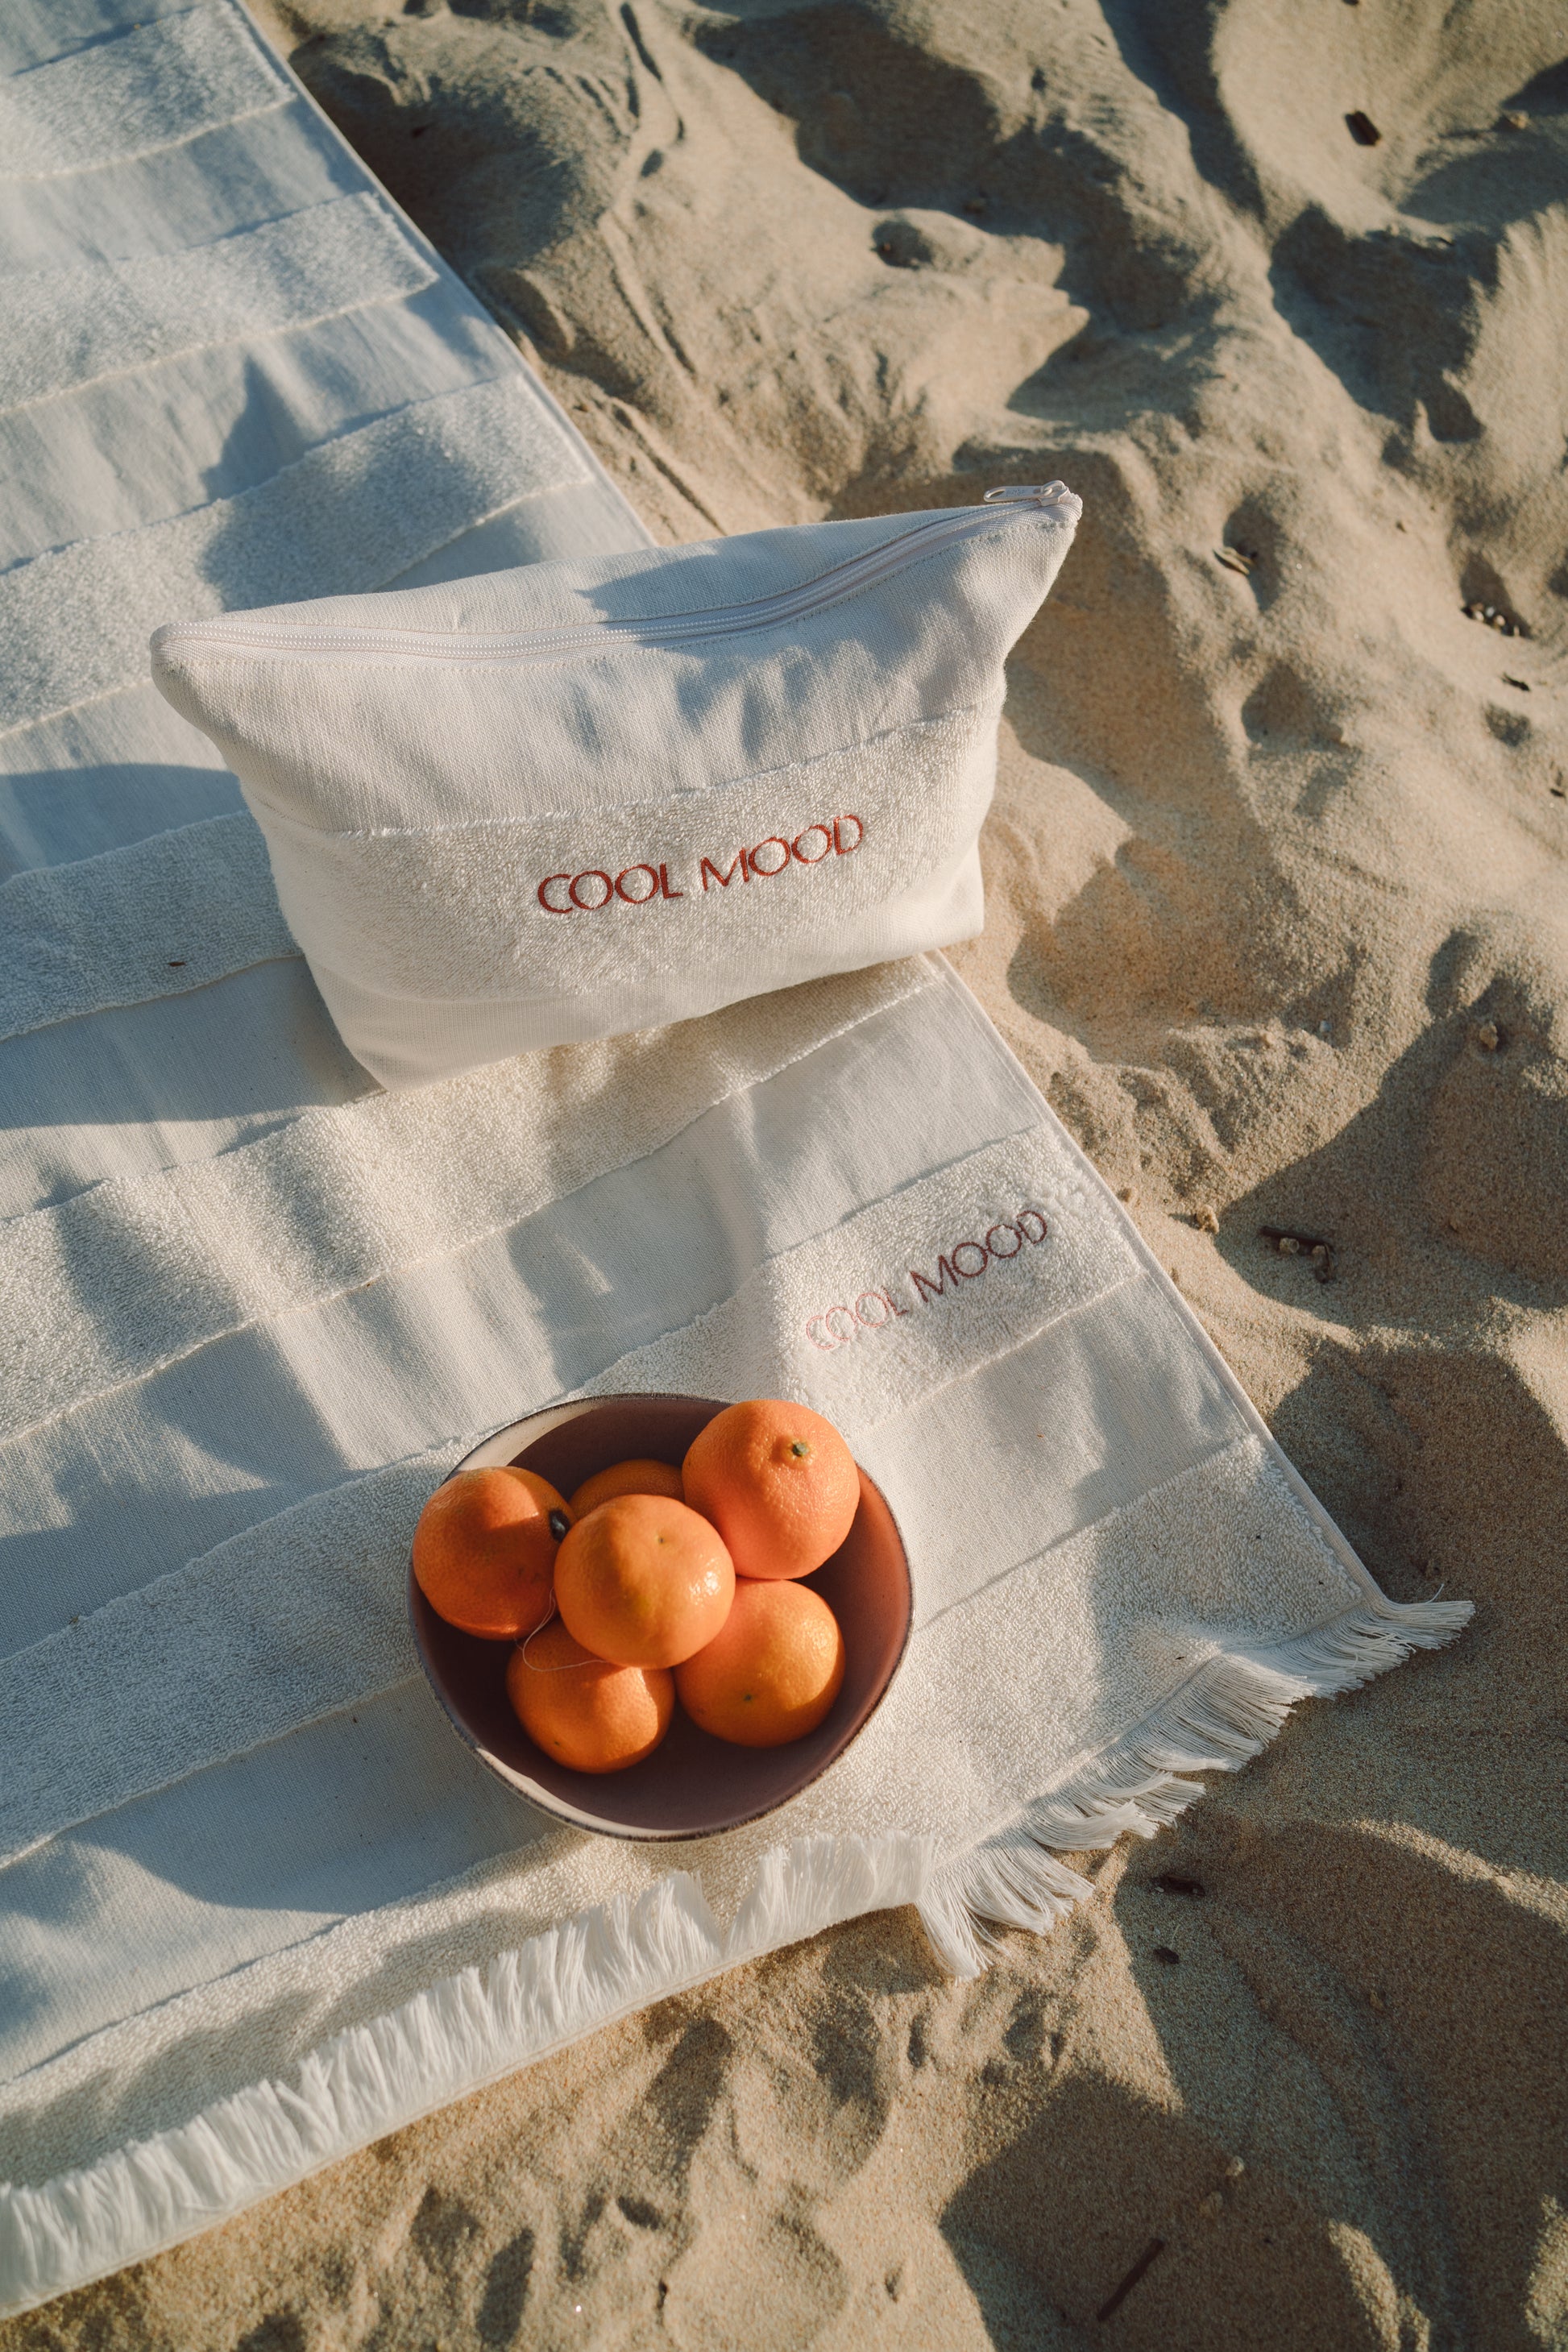 You can also find the perfect pouch to match with your beach towel!